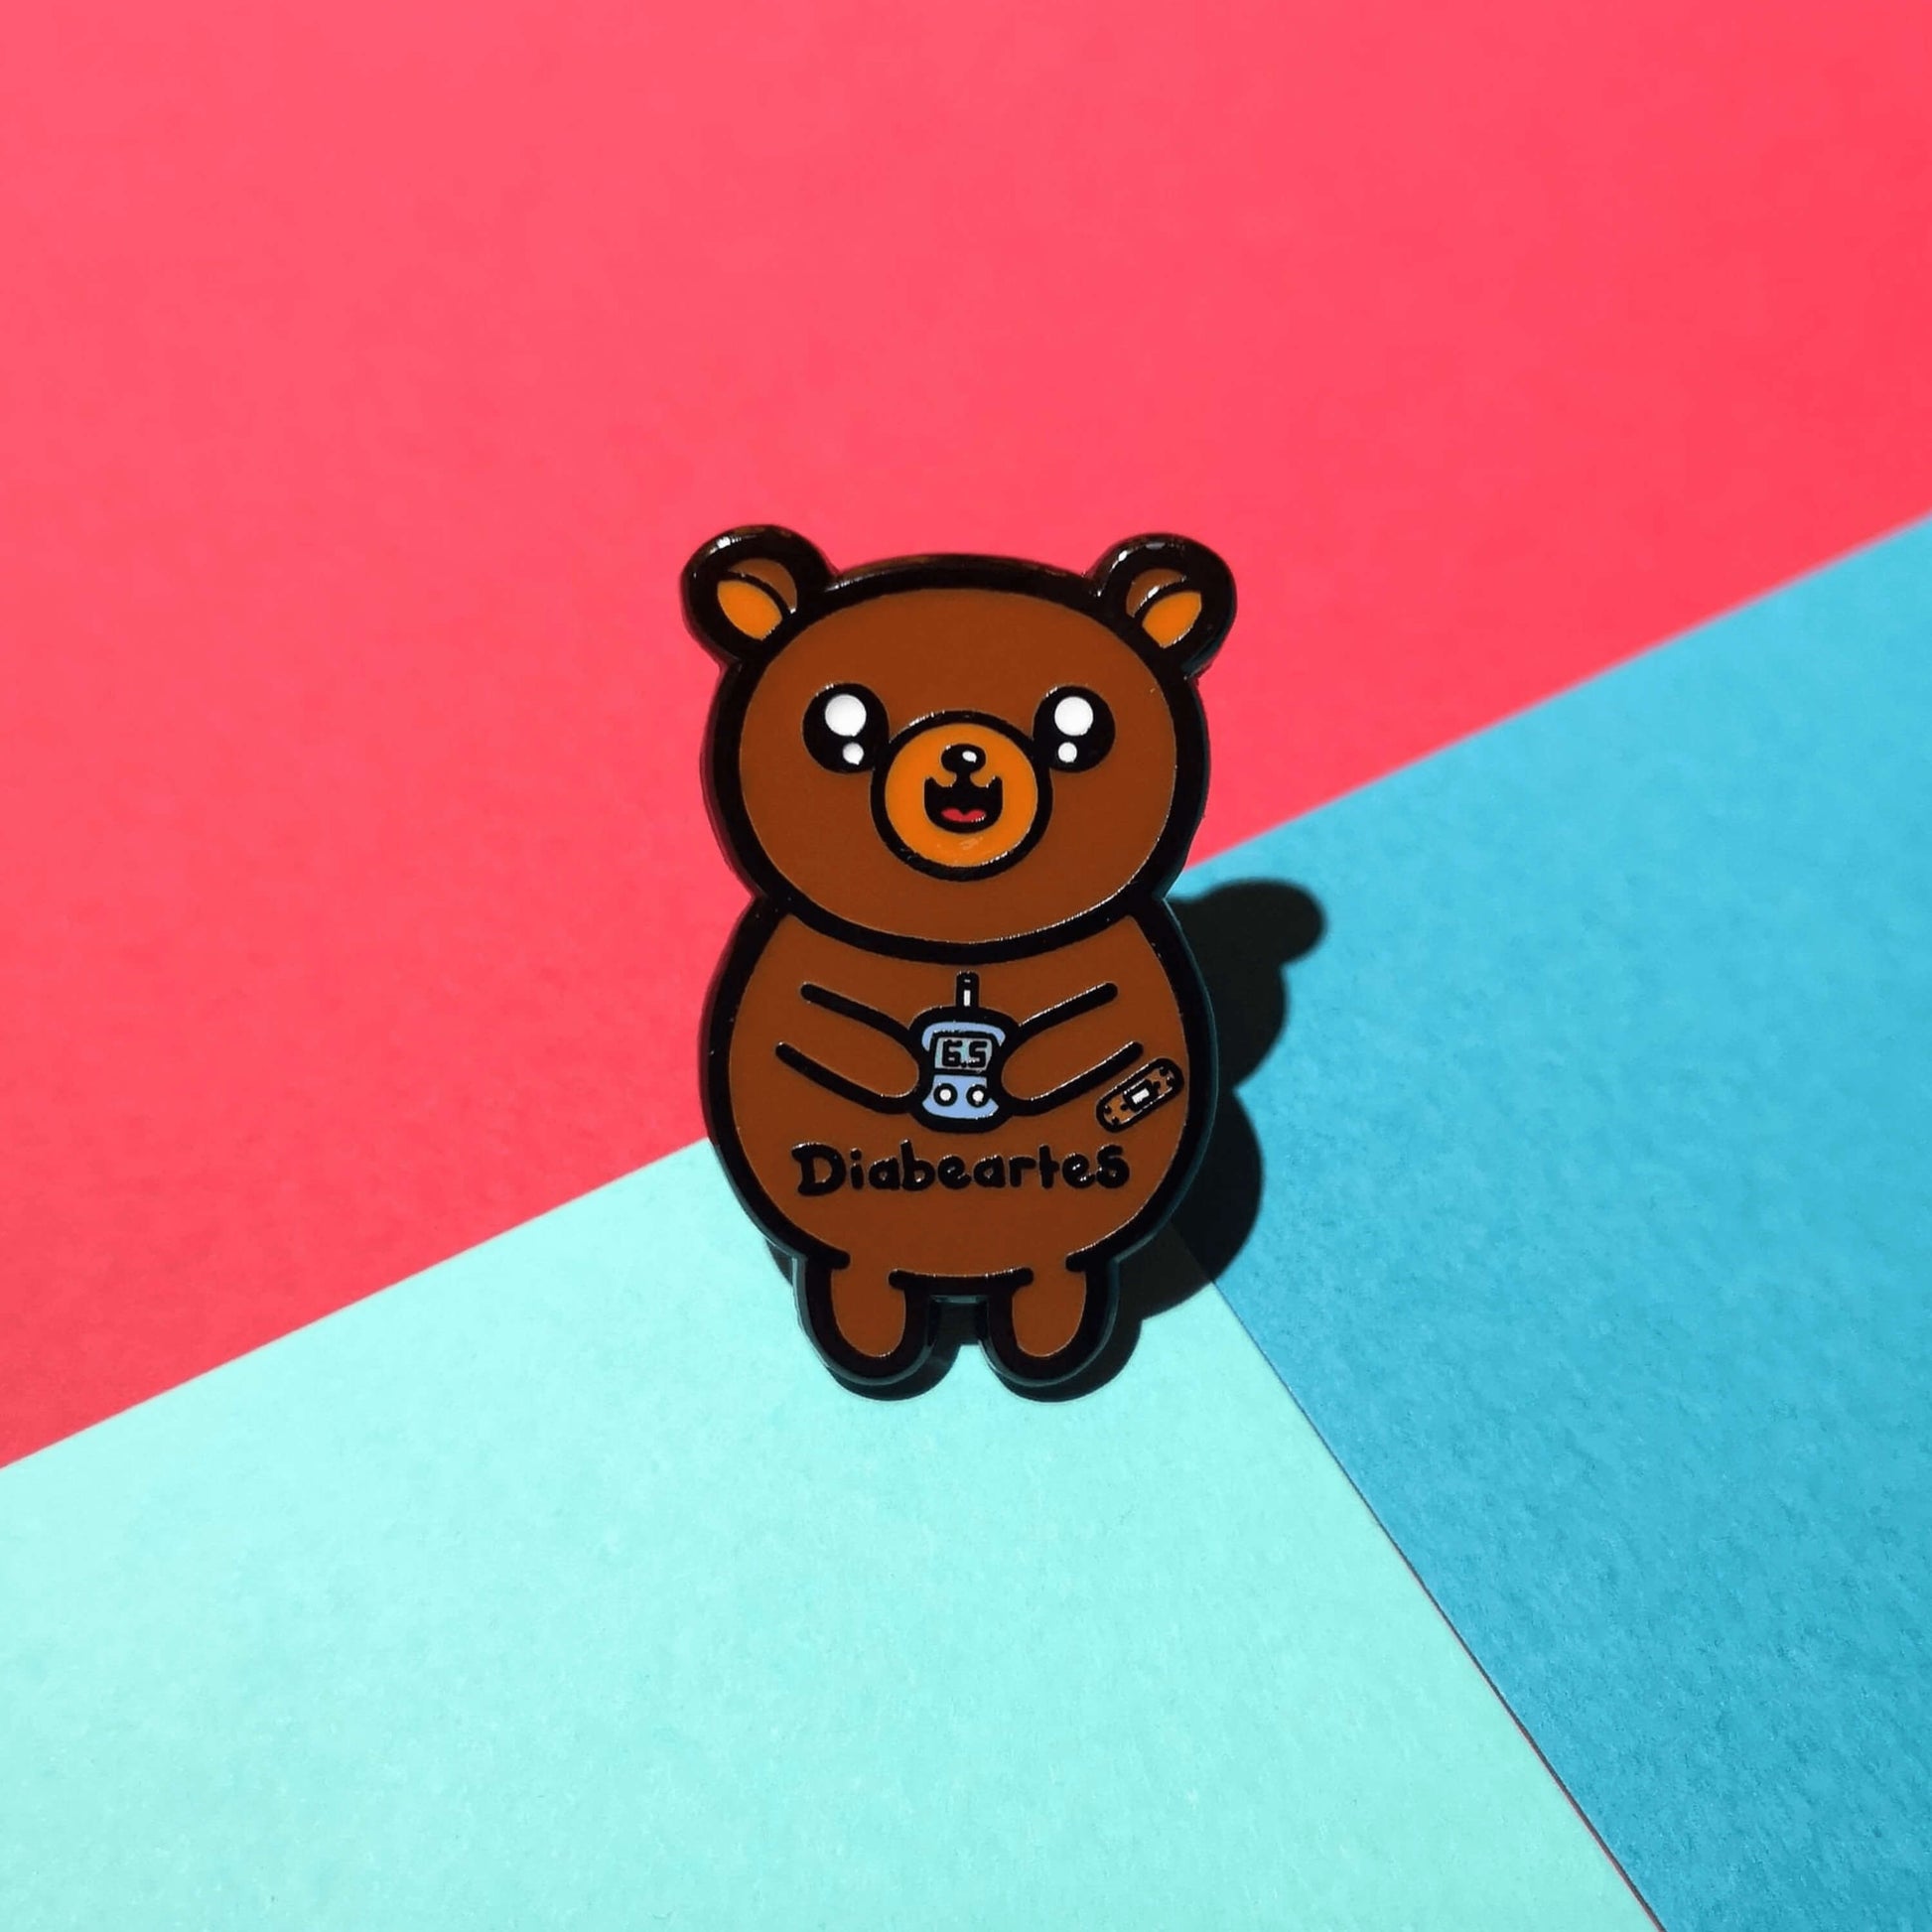 The Diabeartes Enamel Pin - Diabetes on a red and blue background. The brown bear shaped pin is smiling holding a blood glucose reader with a plaster on its arm, across its tummy reads 'diabeartes' in black. The design is raising awareness for those with type 1 diabetes and type 2 diabetes.